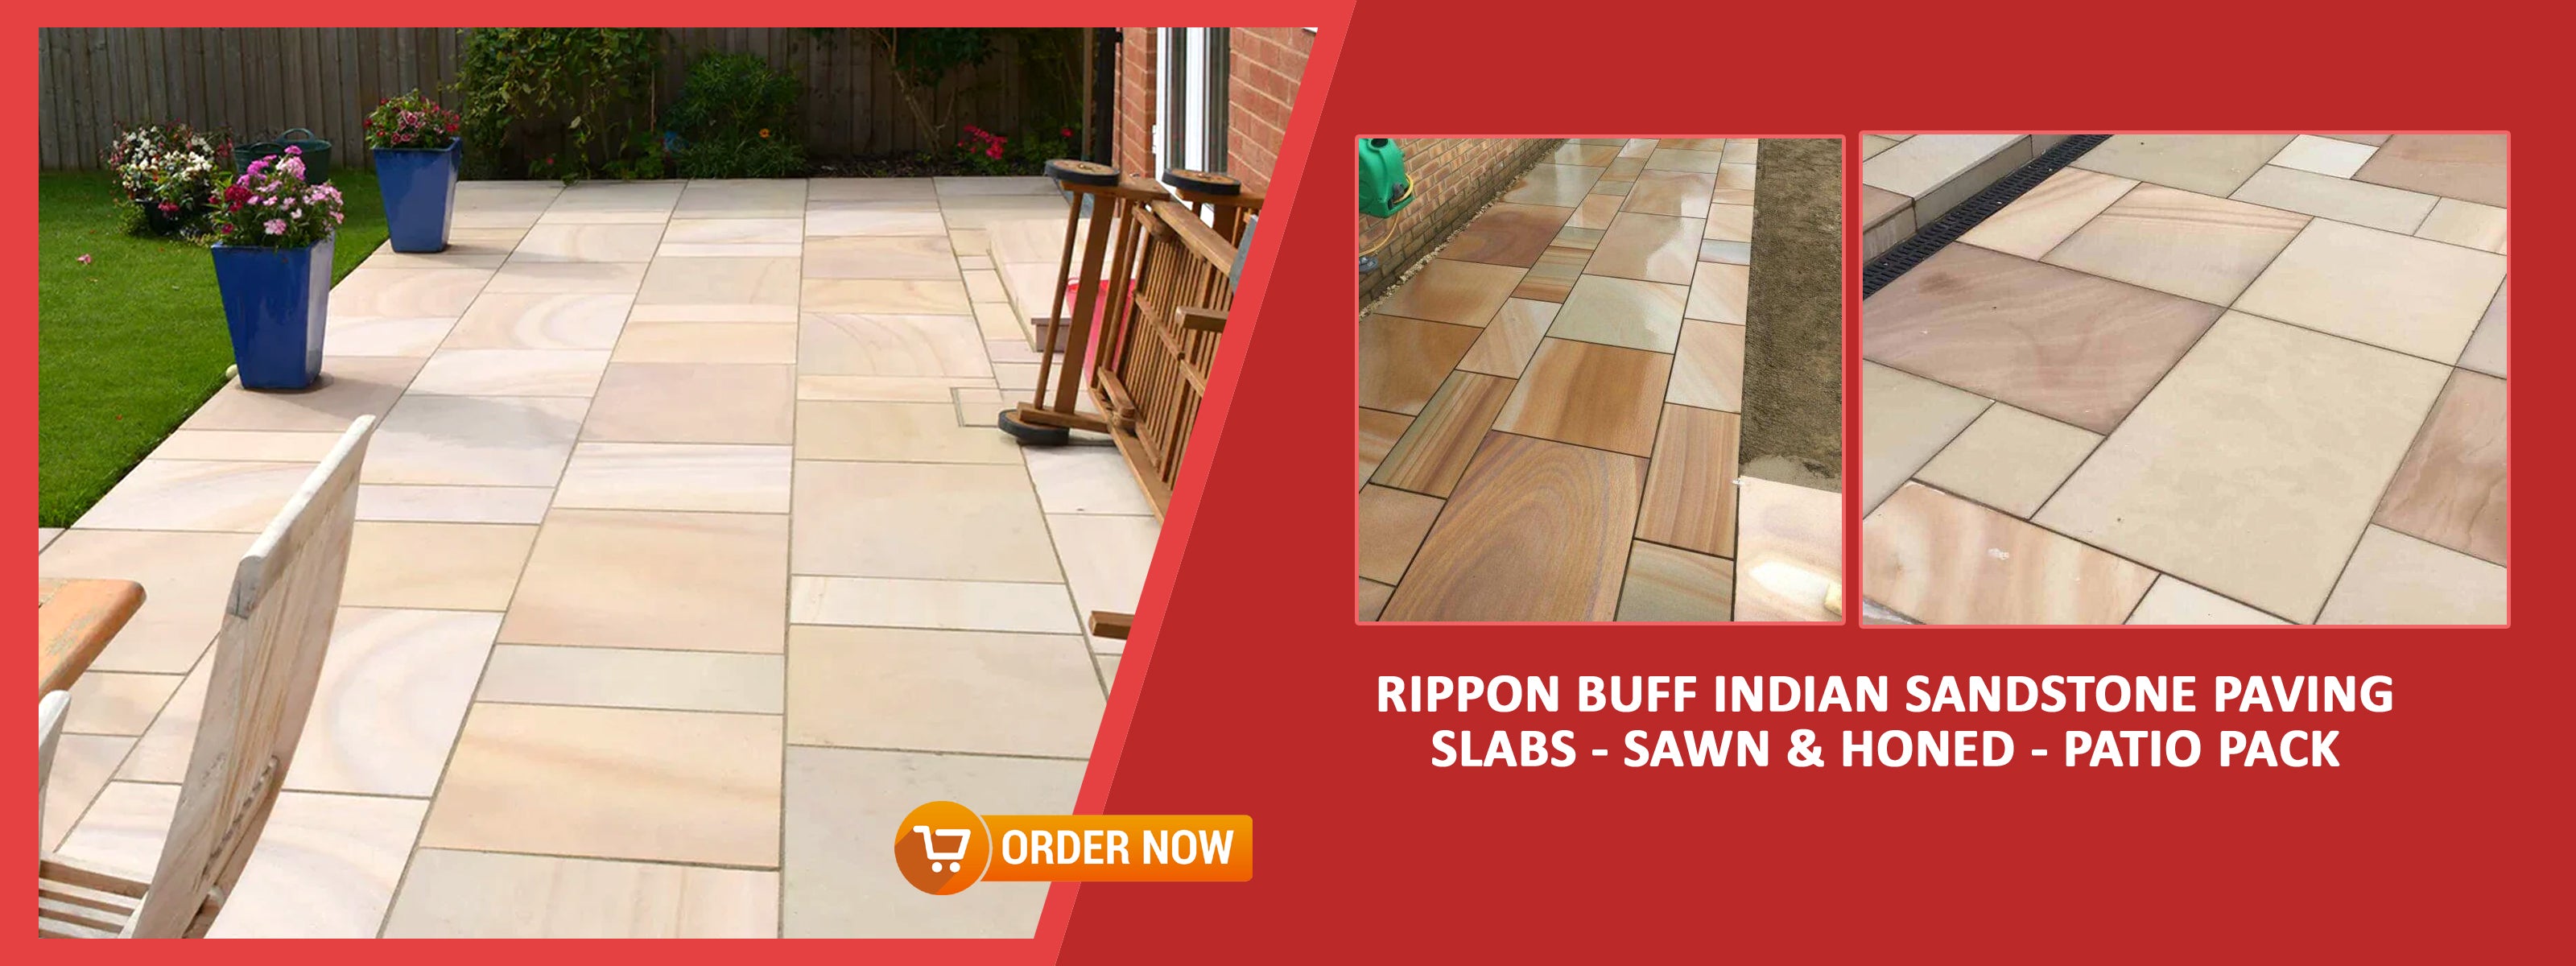 RIPPON BUFF INDIAN SANDSTONE PAVING SLABS - SAWN & HONED - PATIO PACK